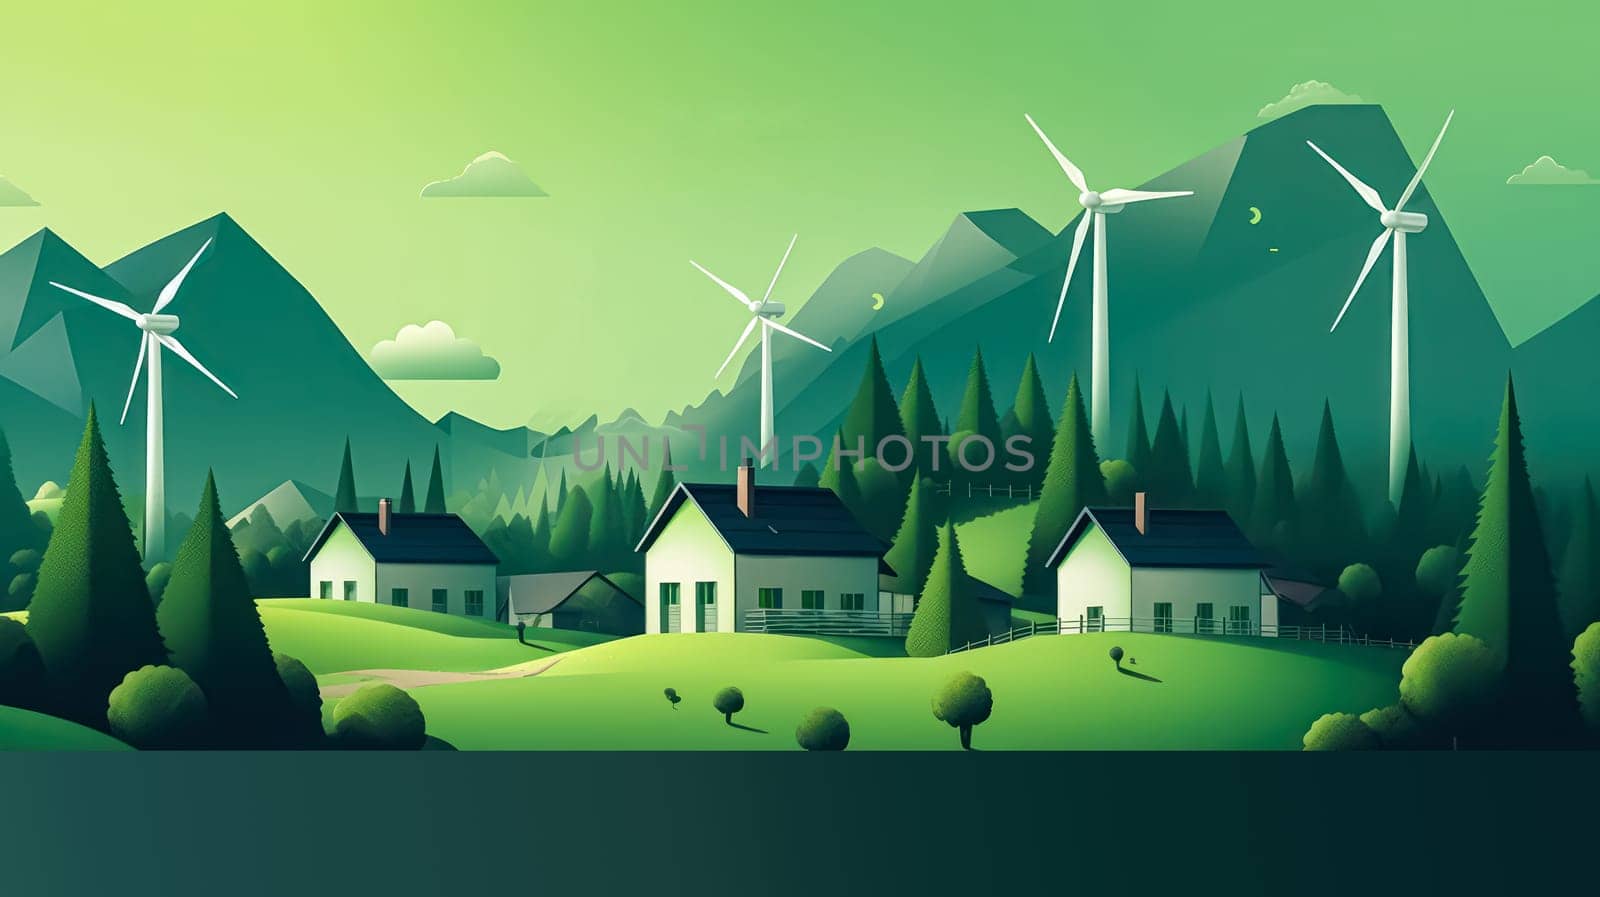 A green landscape featuring houses and windmills, illustrating the concept of environmentally friendly energy utilization and sustainability.